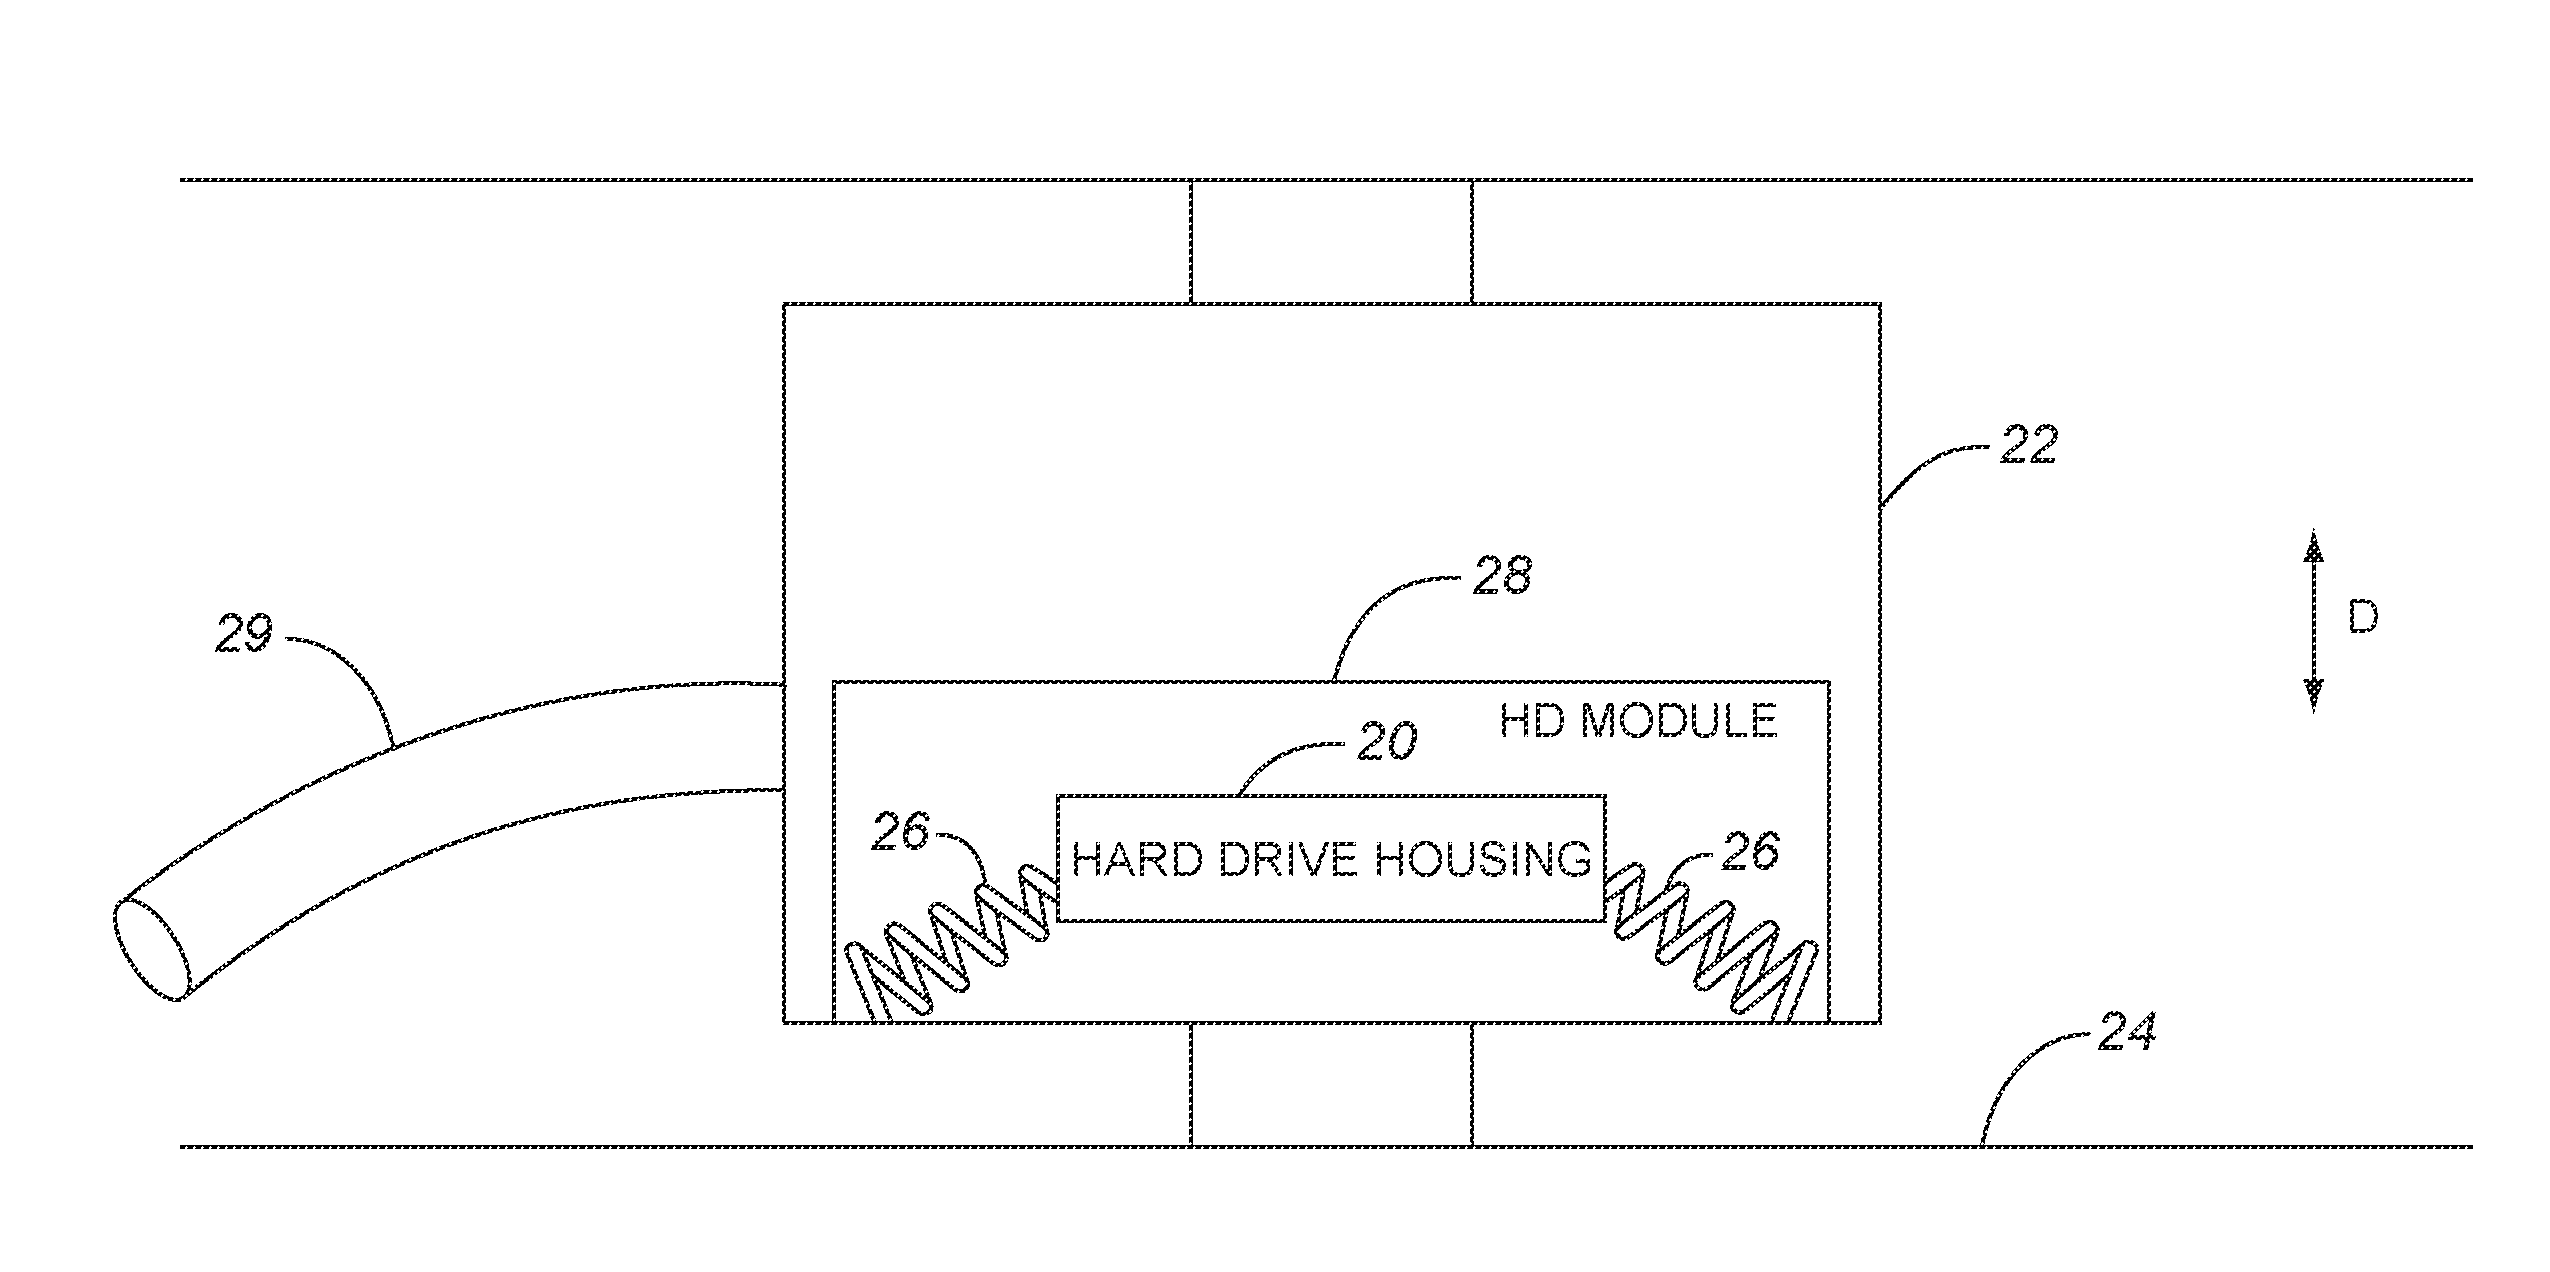 Mobile event data recorder with multiple orientation vibration isolation